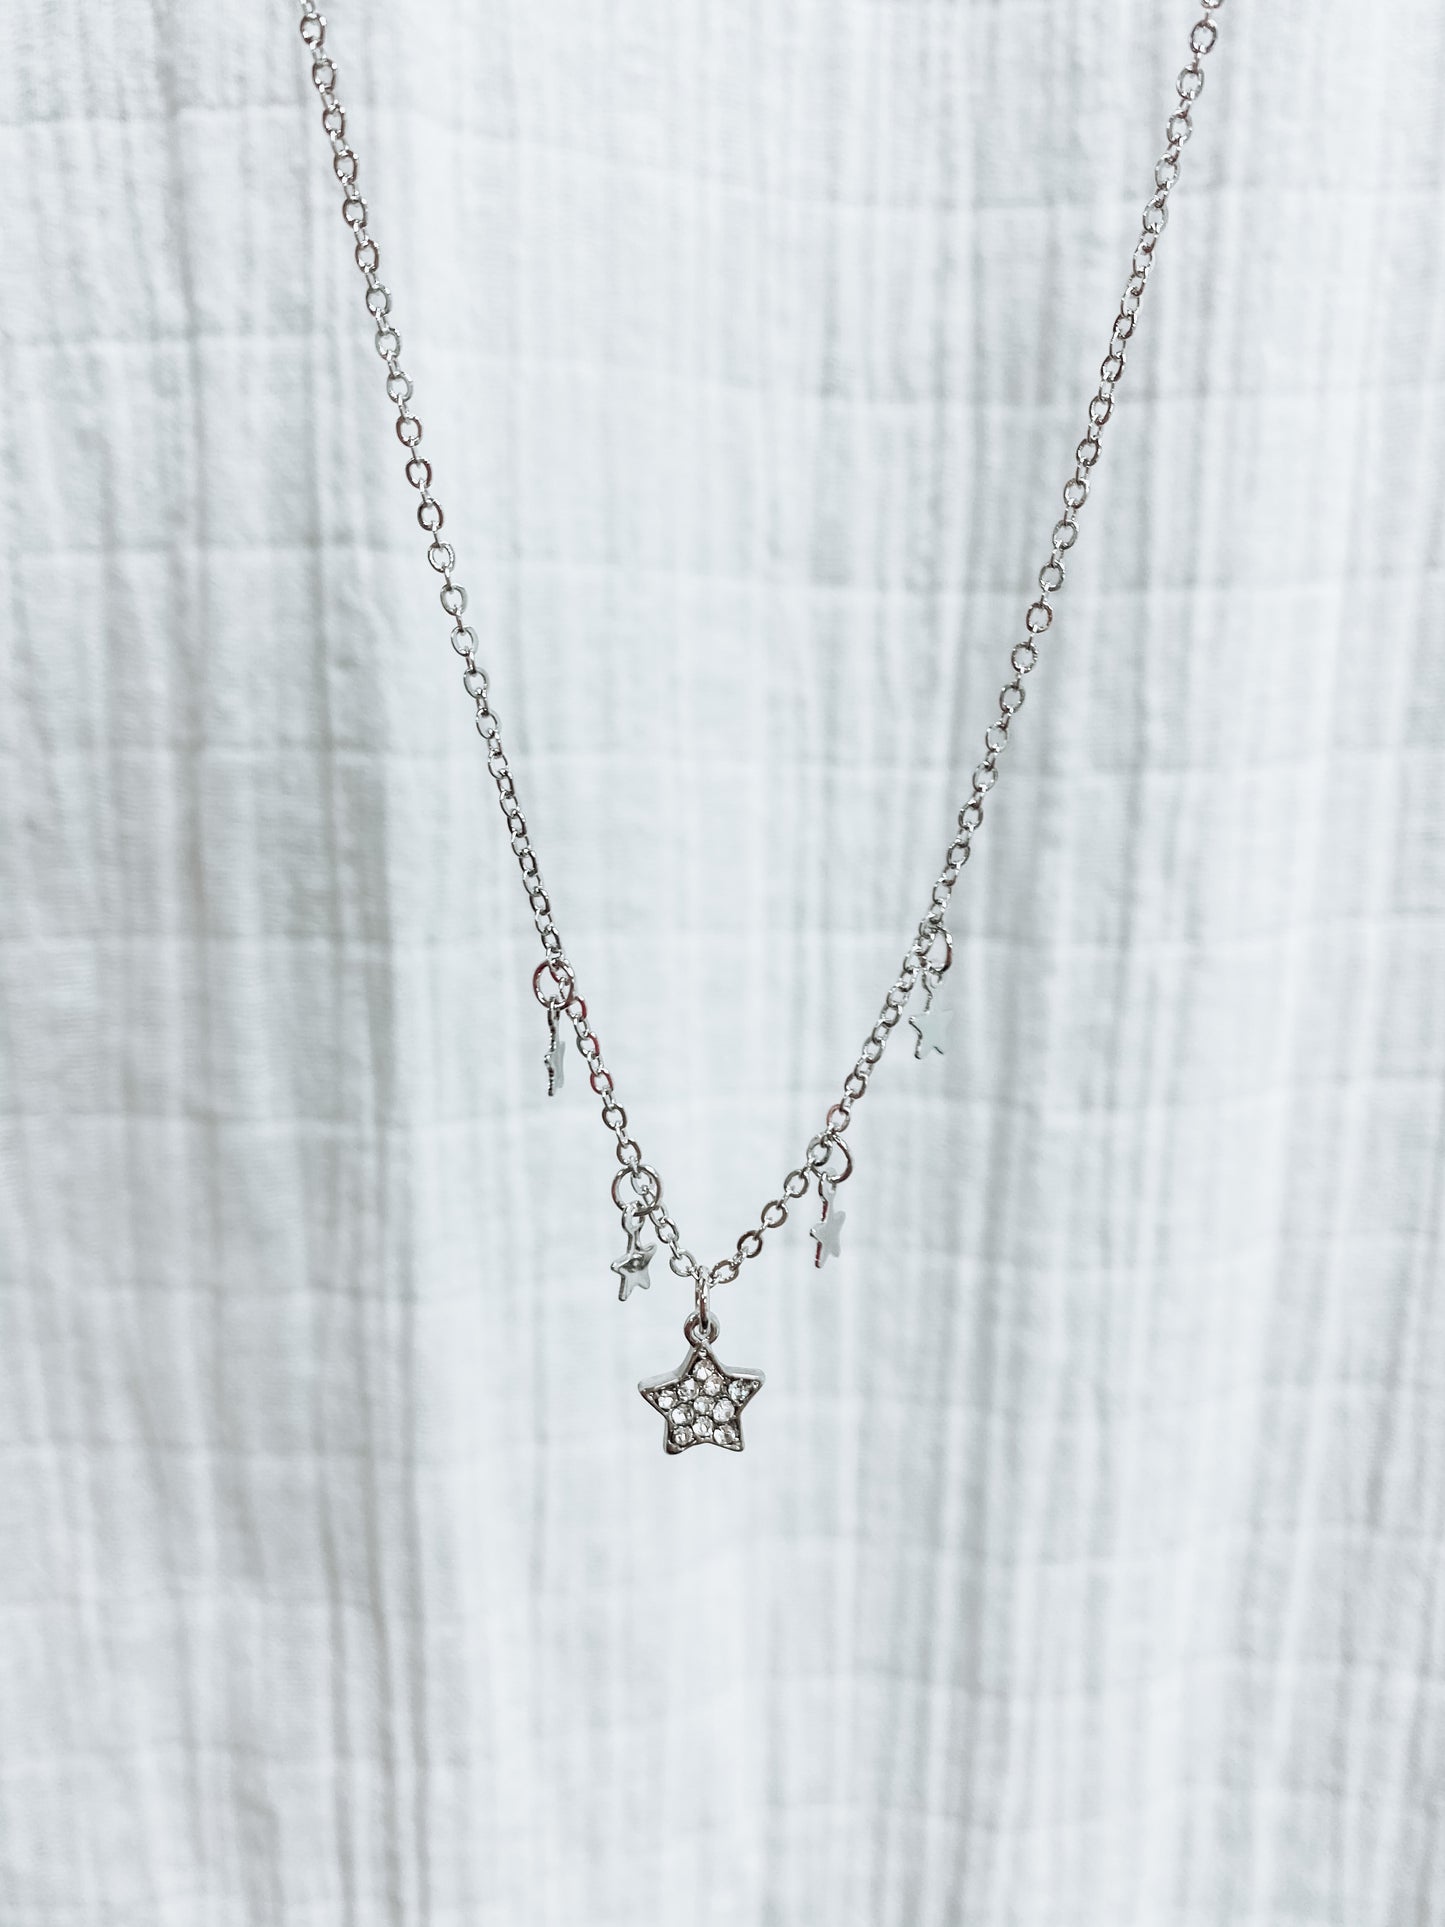 Star Necklaces